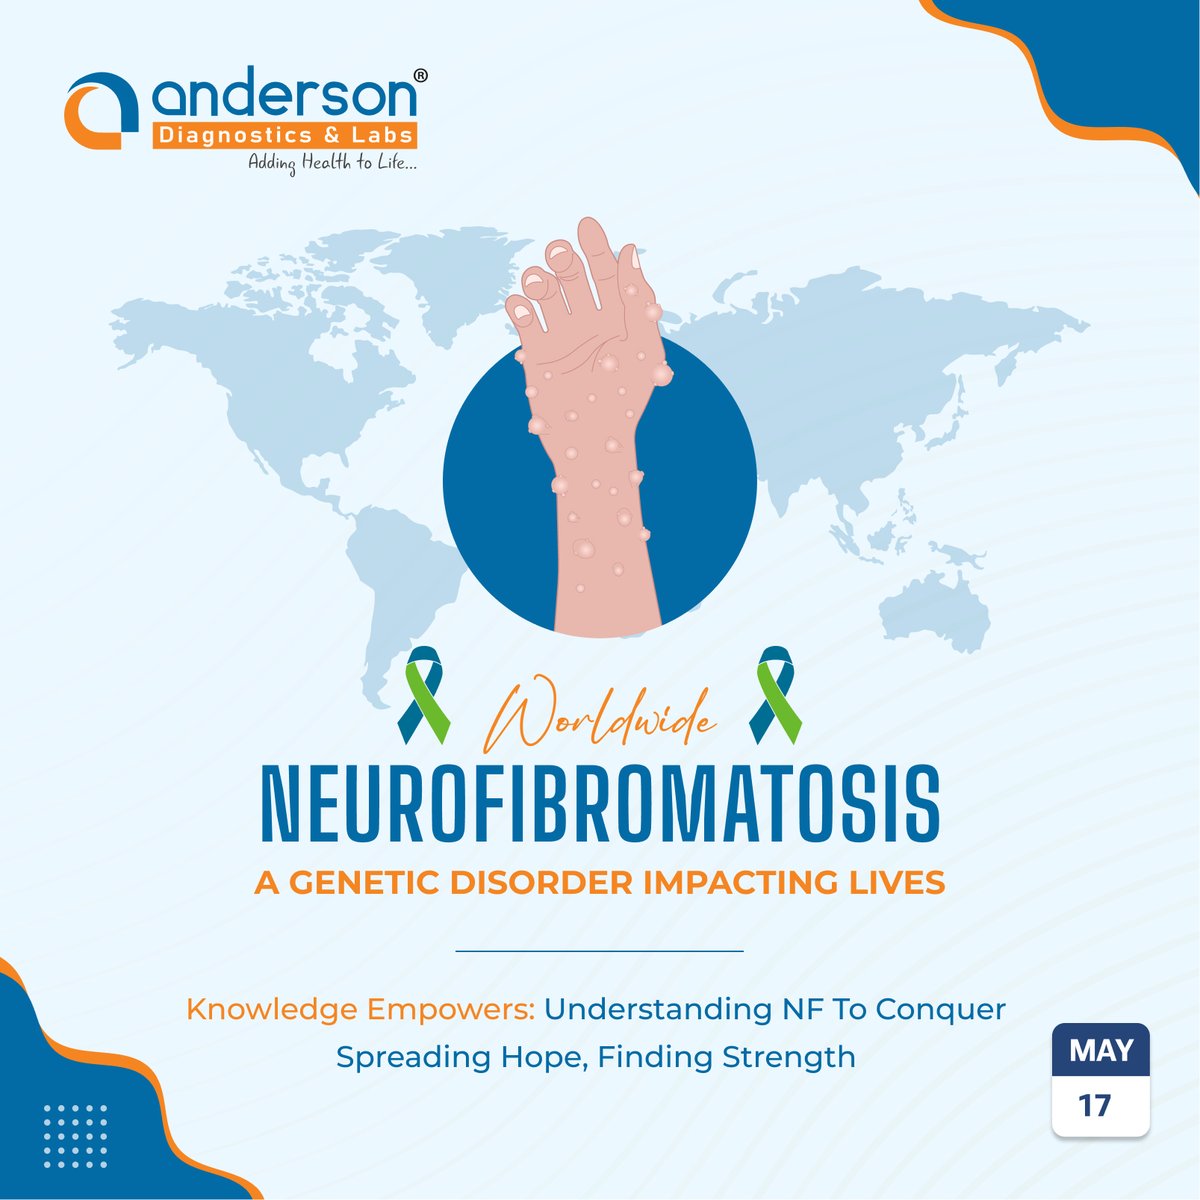 May 17th is Neurofibromatosis Day. Learn about NF, a genetic disorder causing disfigurement and pain. Understanding and support are crucial. Stand united with compassion. No one fights alone. Wear a blue ribbon and share hope! 

#Neurofibromatosis #NFAwareness #SpreadHope